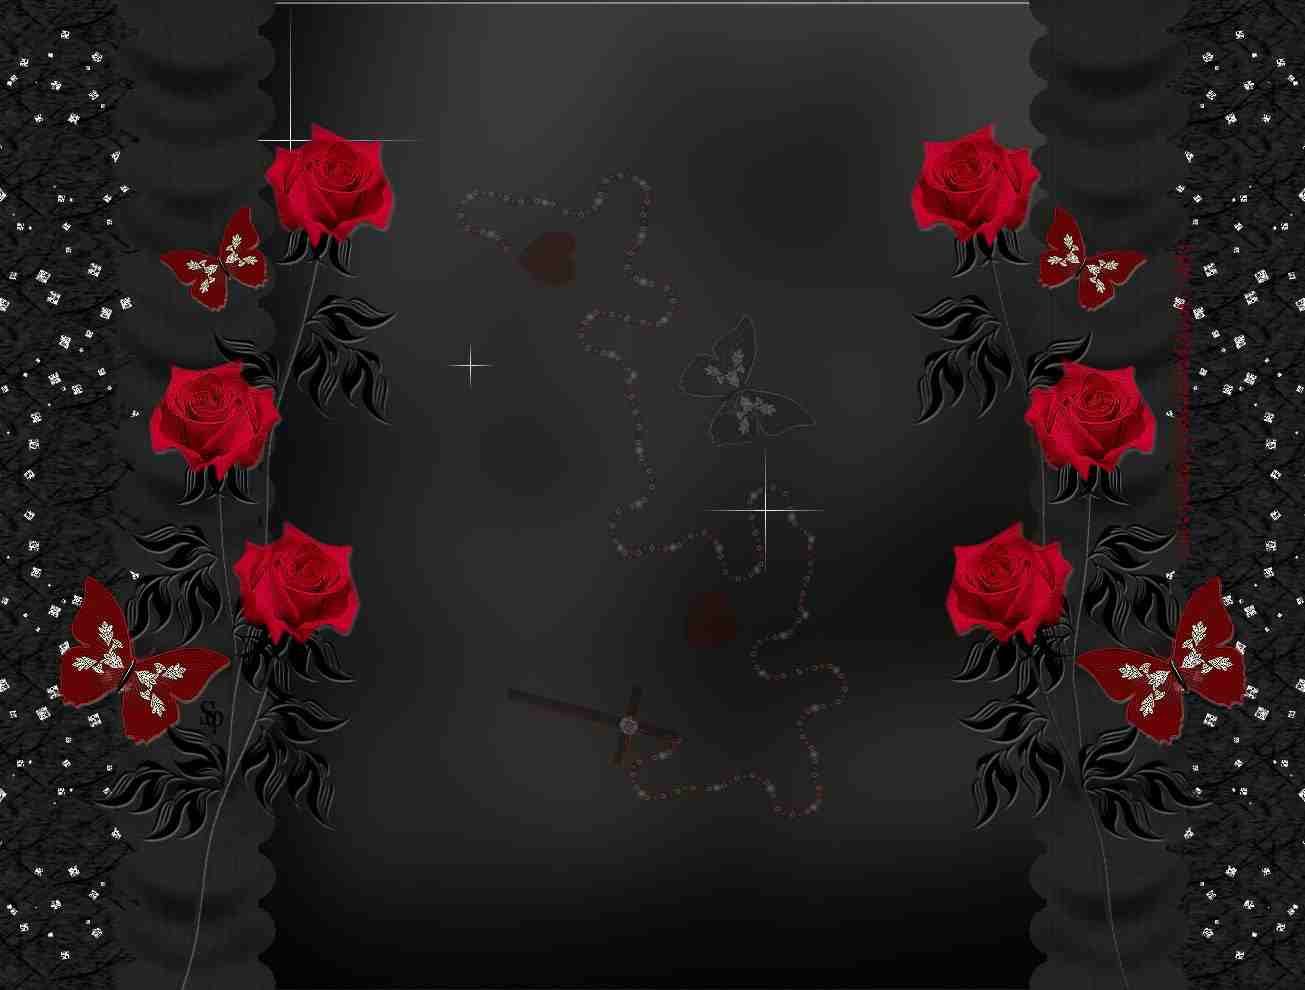 Gothic Roses Wallpaper Free Gothic Roses Background